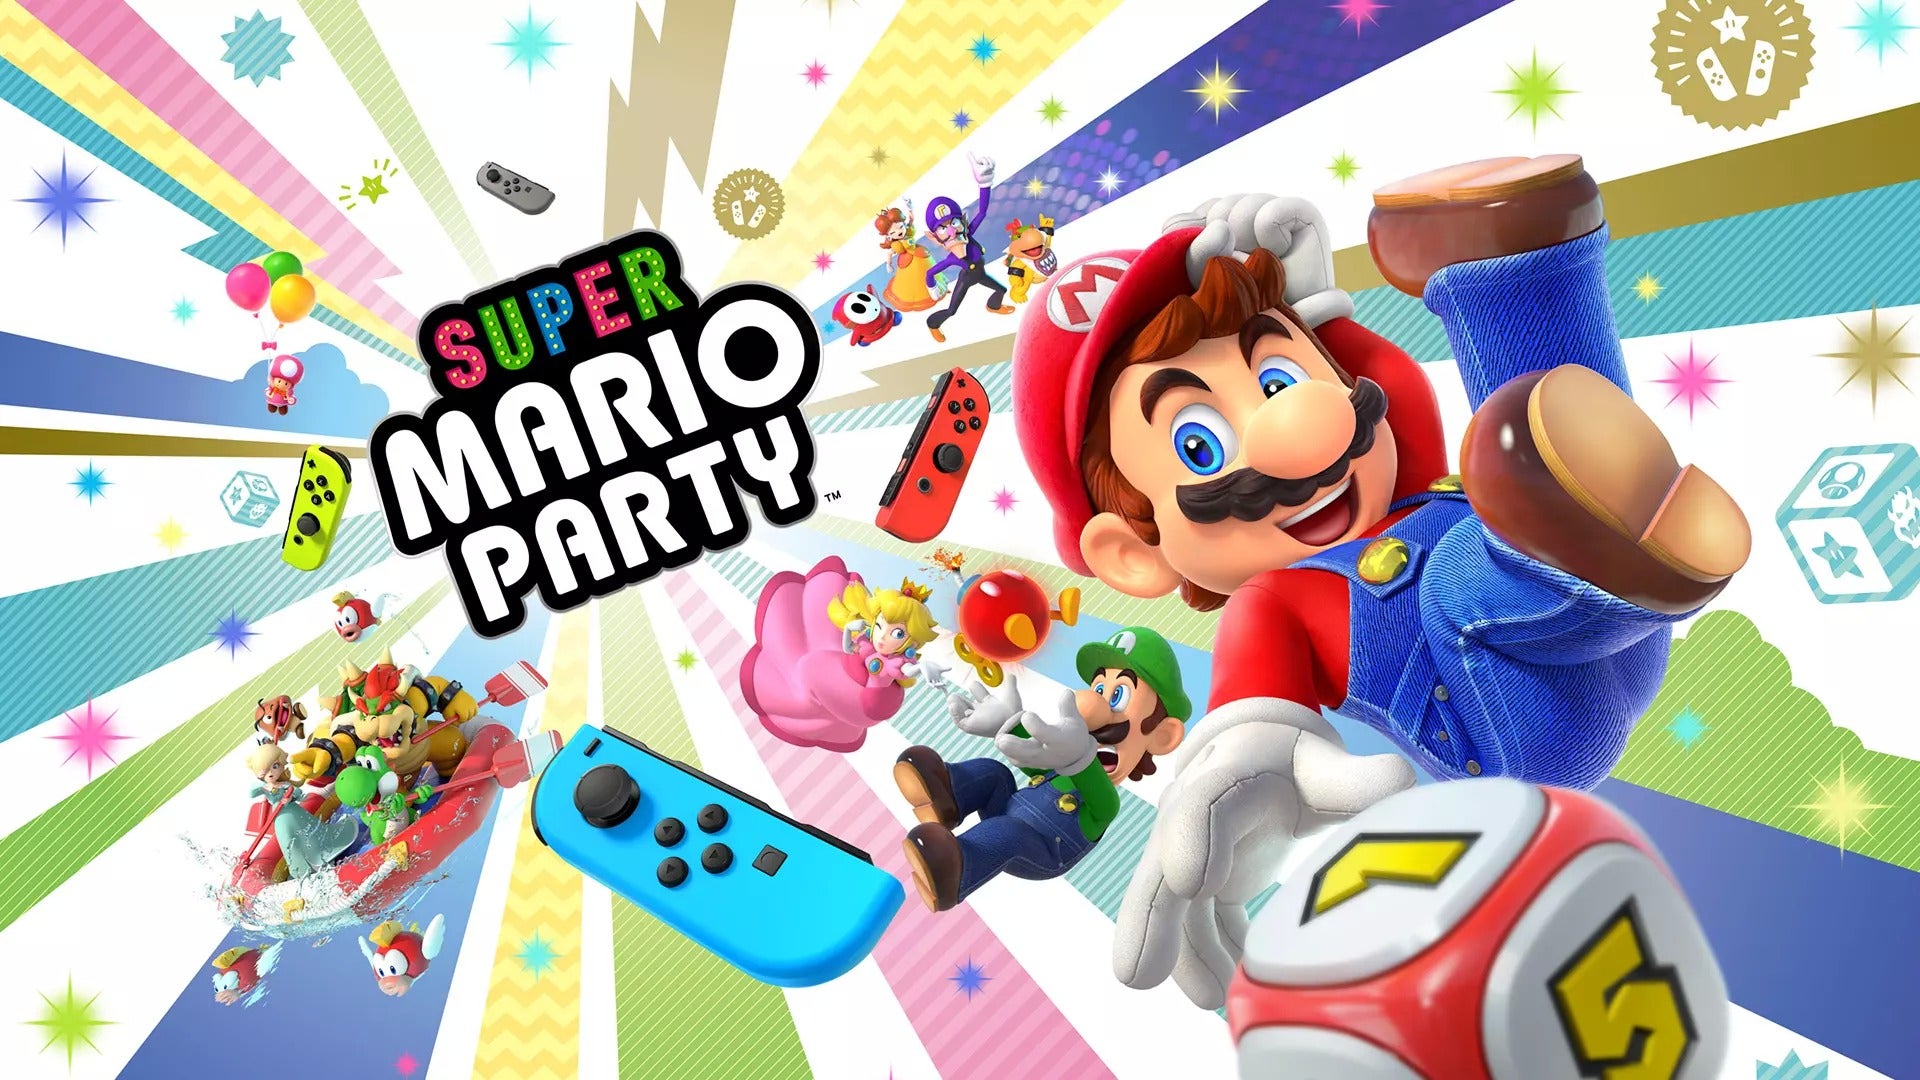 Nintendo adds online multiplayer to Super Mario Party 2.5 years after release VG247